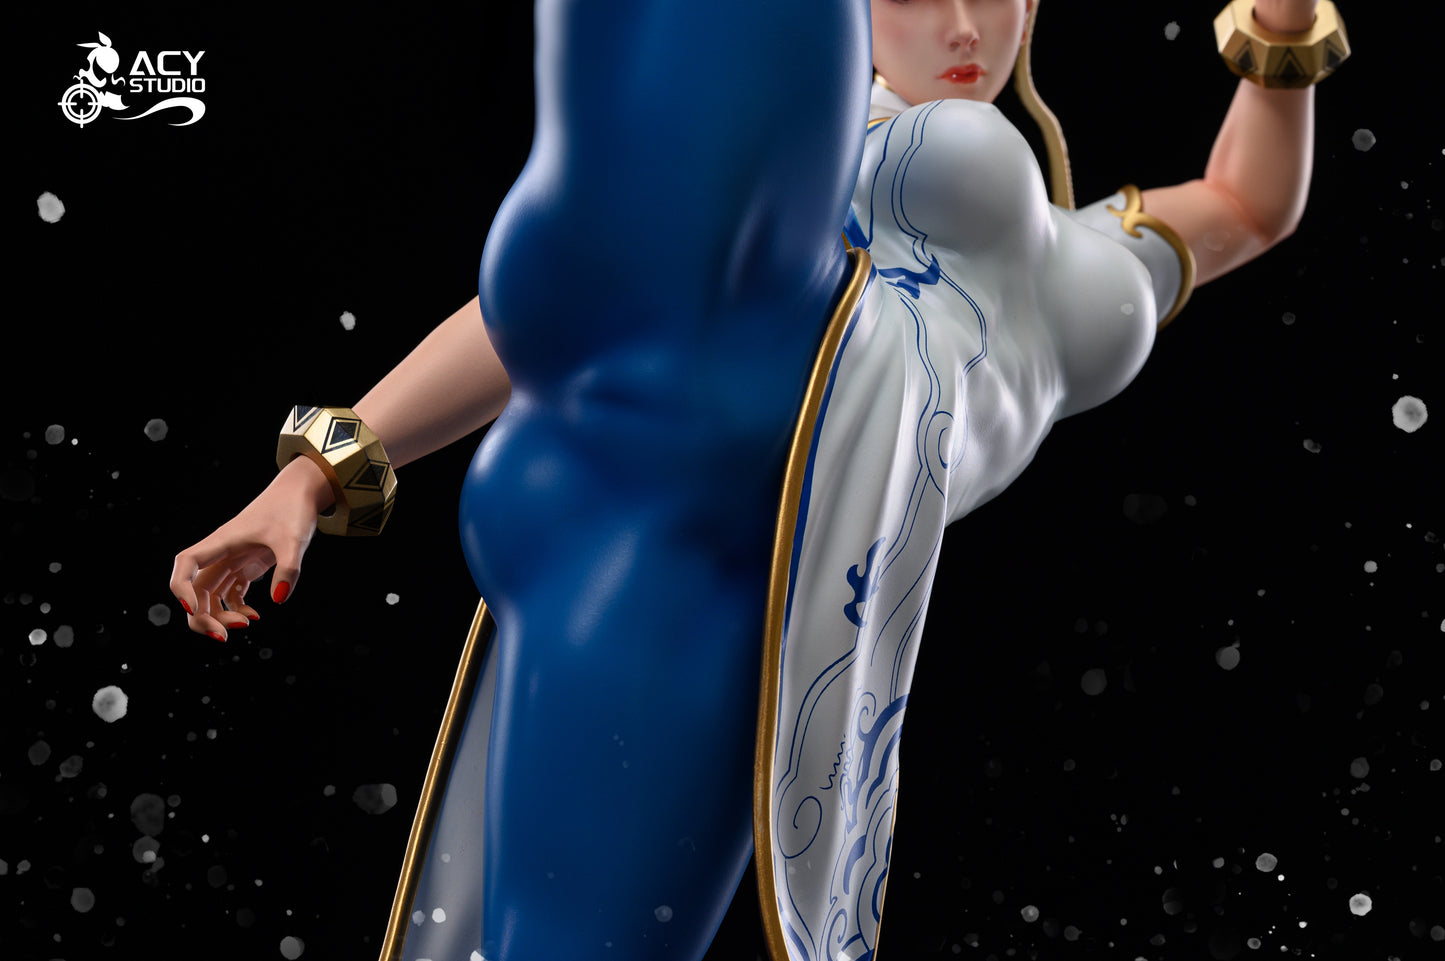 ACY STUDIO – STREET FIGHTER: FEMALE FIGHTER SERIES, CHUN-LI (18+) [SOLD OUT]